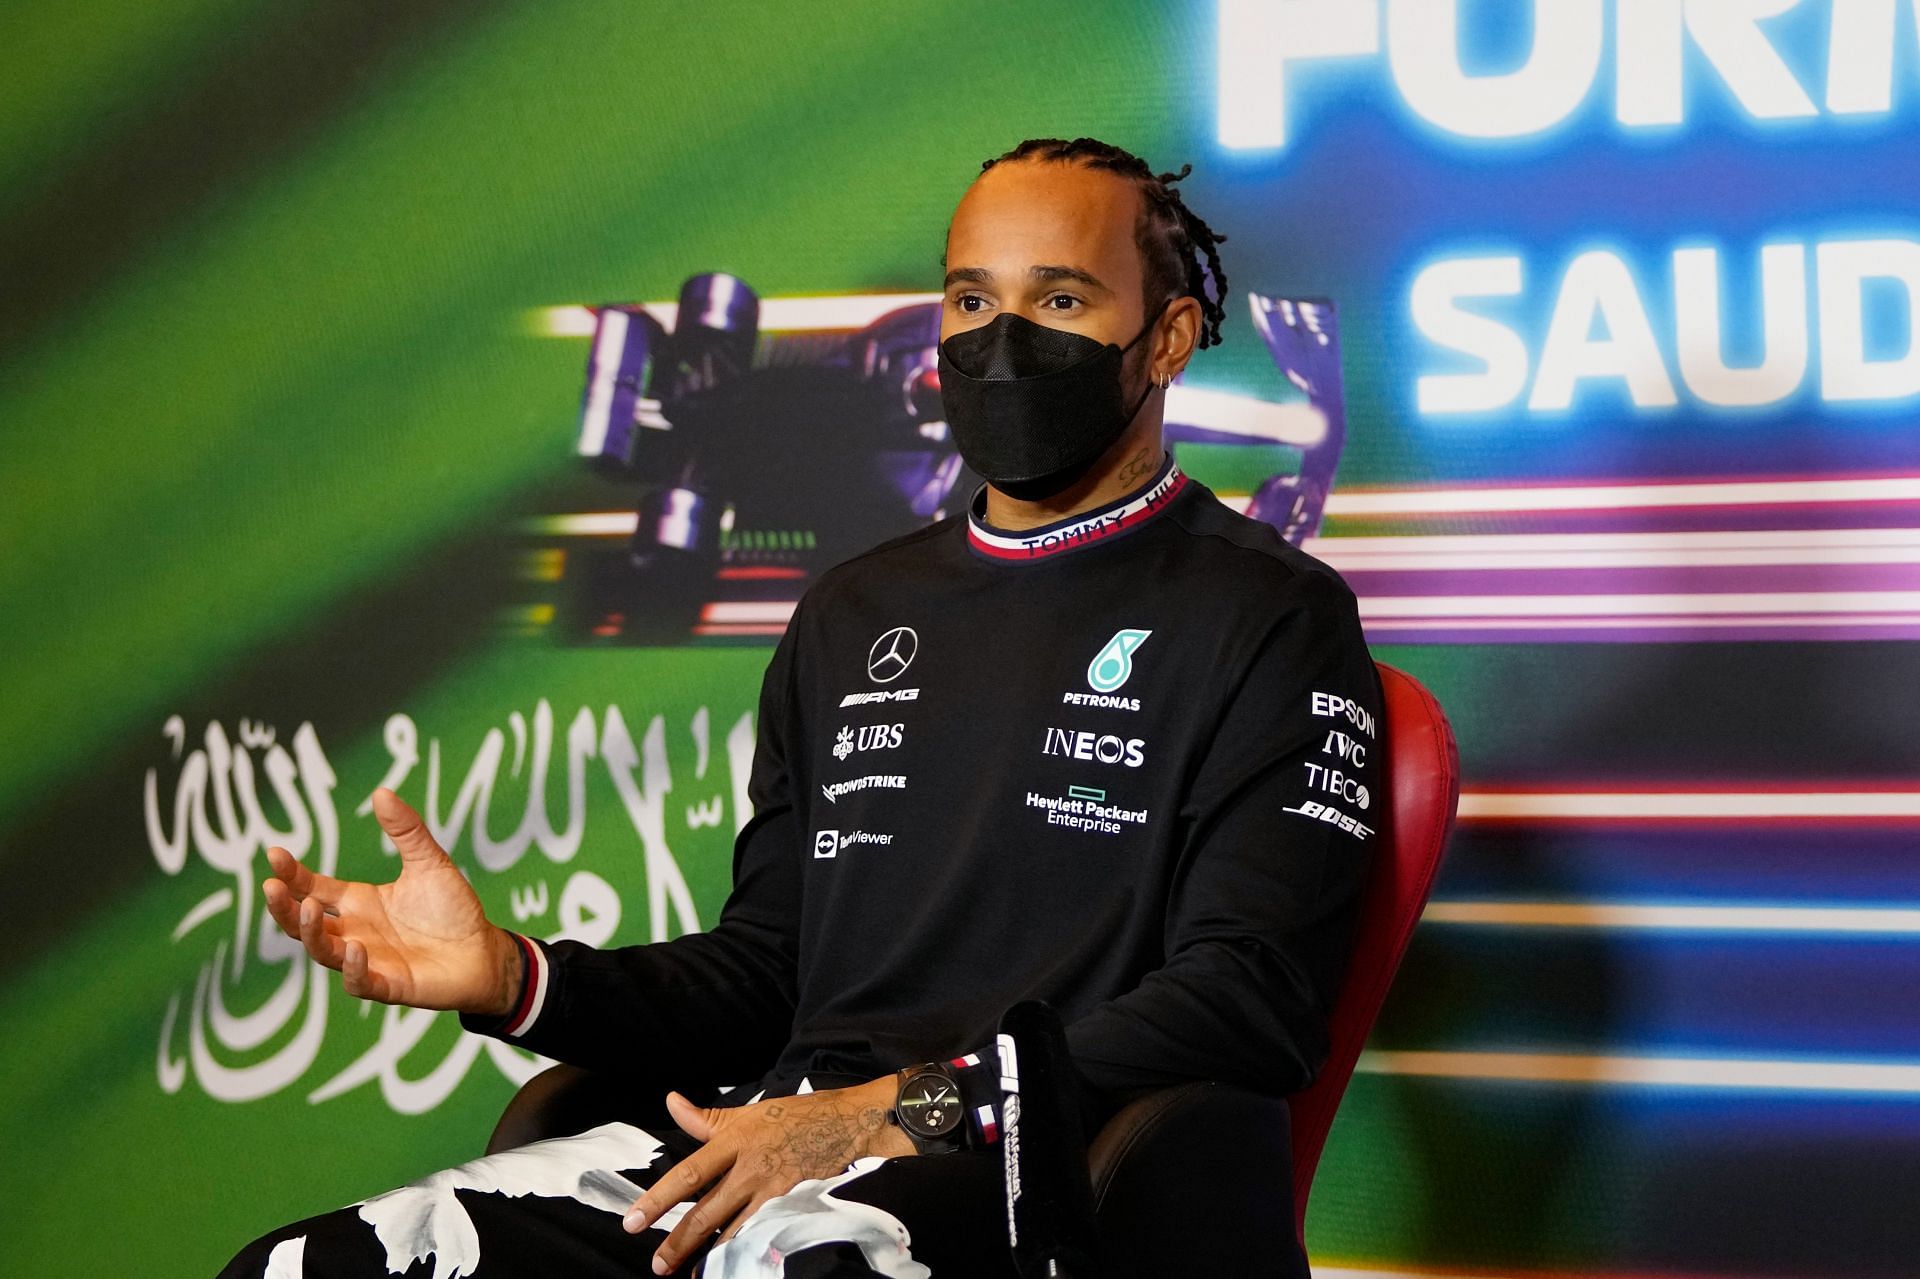 Lewis Hamilton talks in the Drivers Press Conference during previews ahead of the 2021 Saudi Arabian GP. (Photo by Hassan Ammar - Pool/Getty Images)